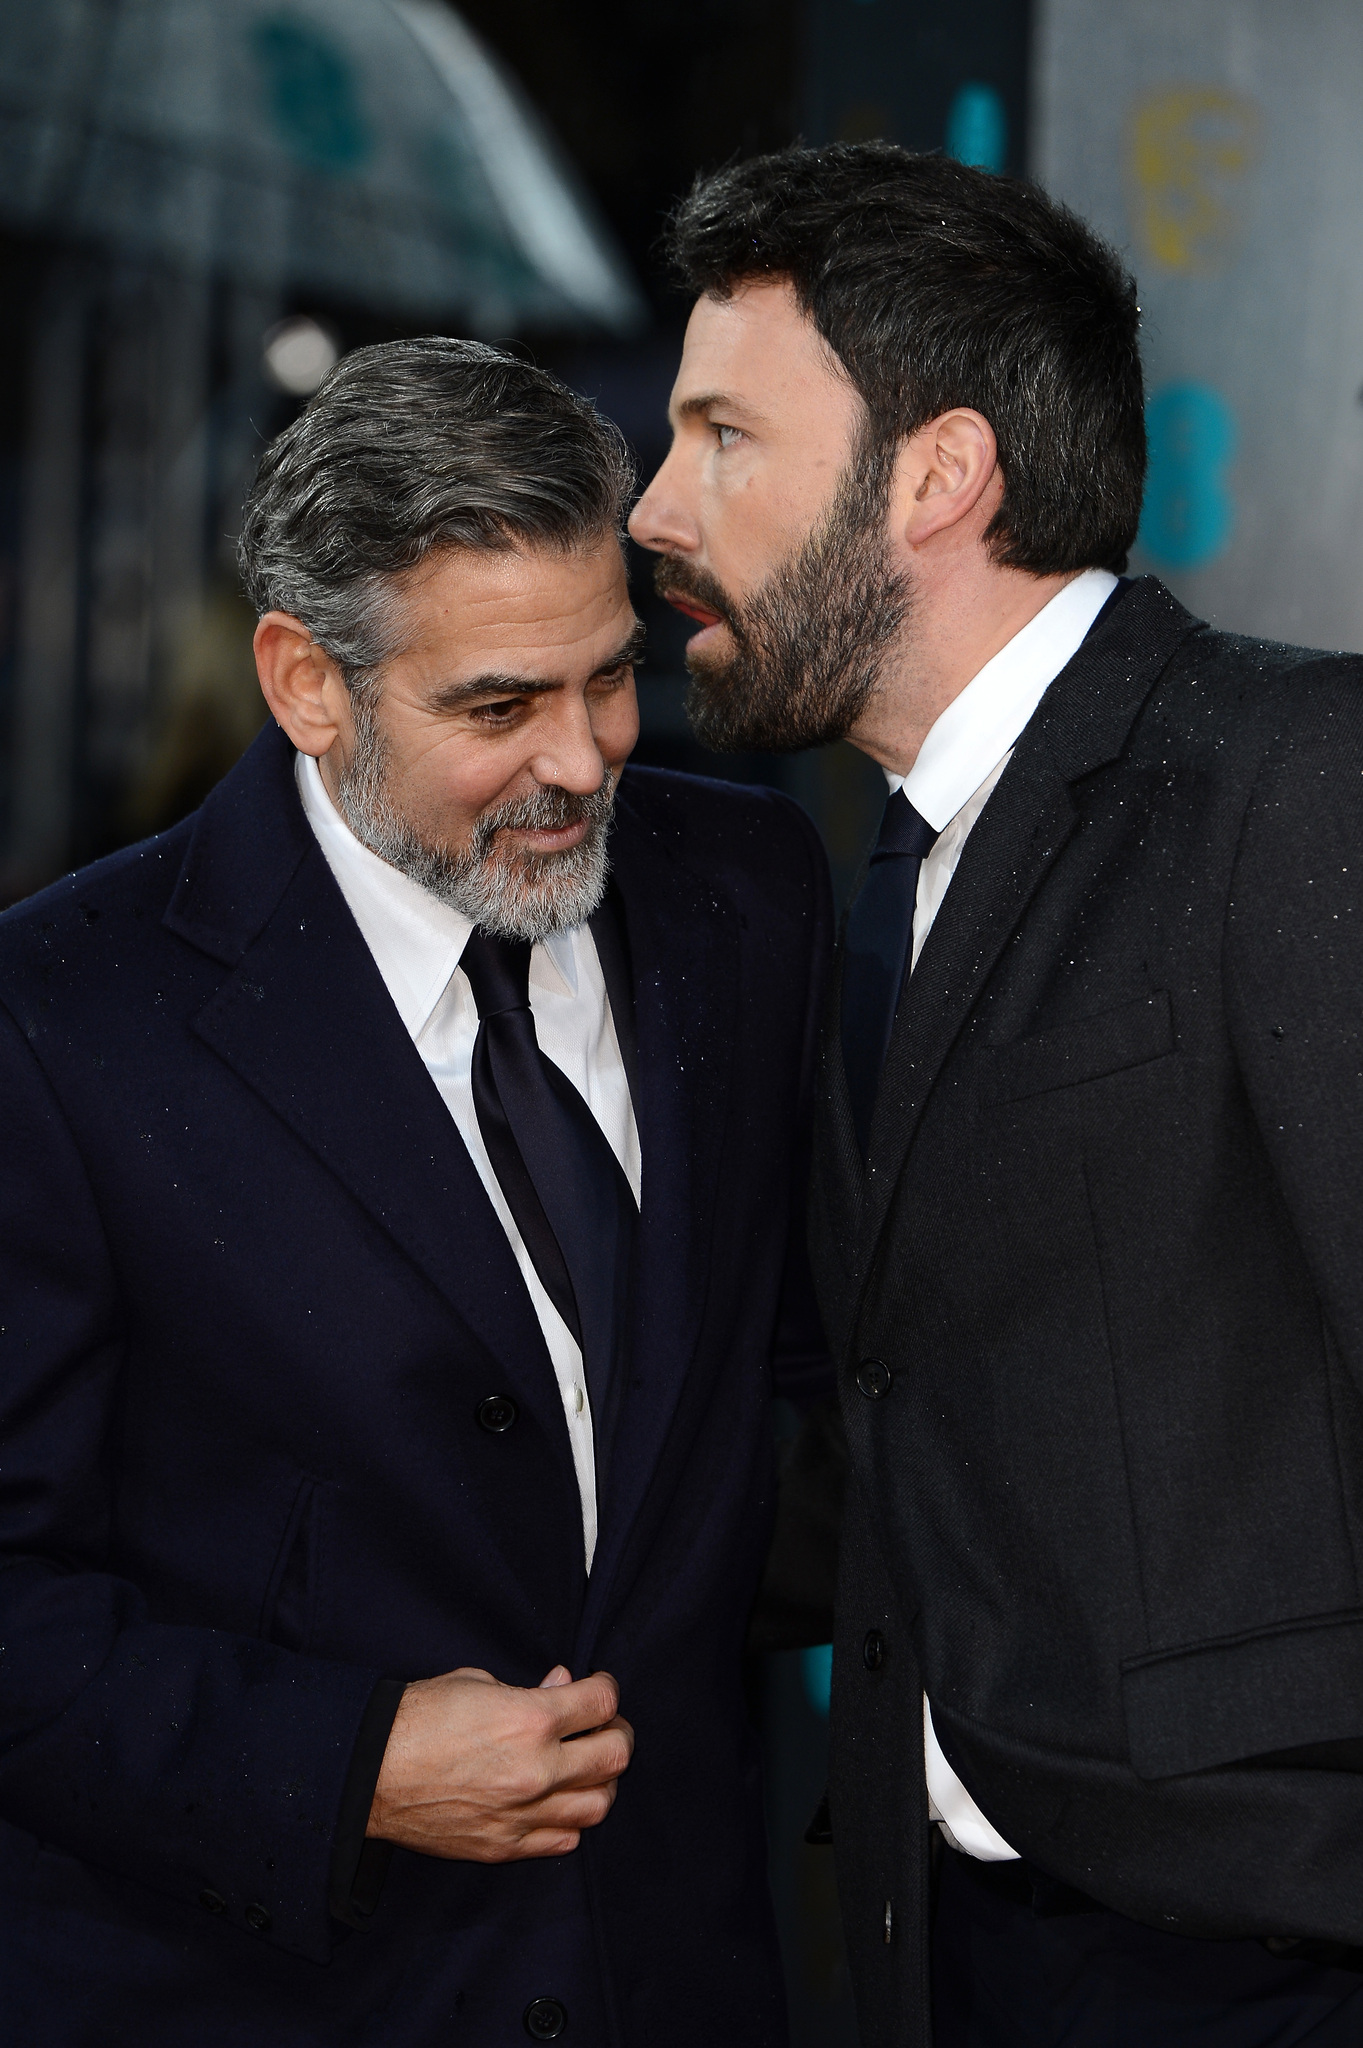 George Clooney and Ben Affleck